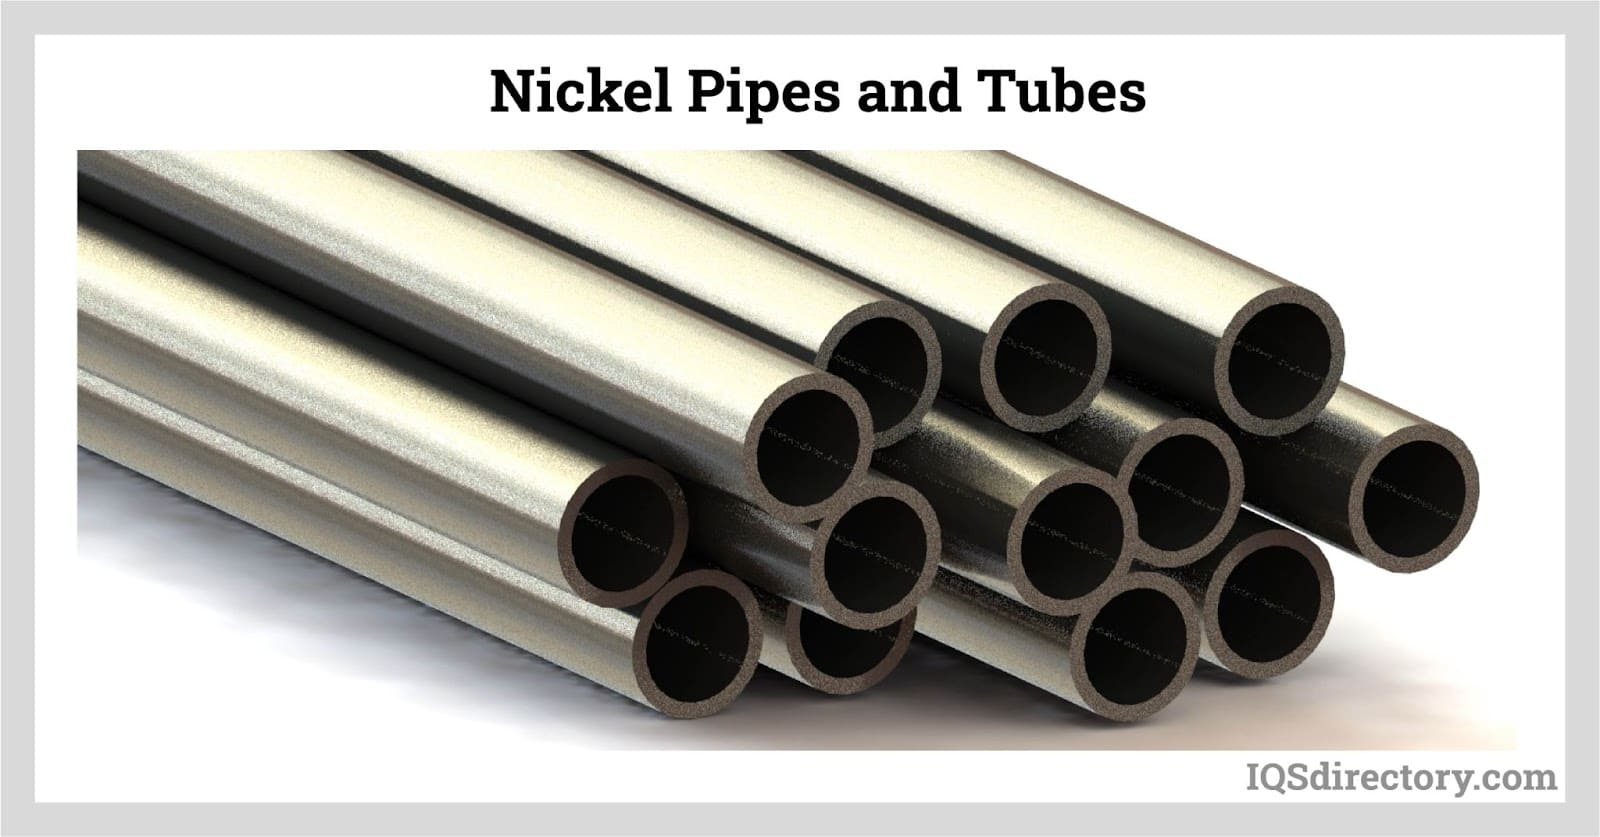 Nickel Pipes and Tubes